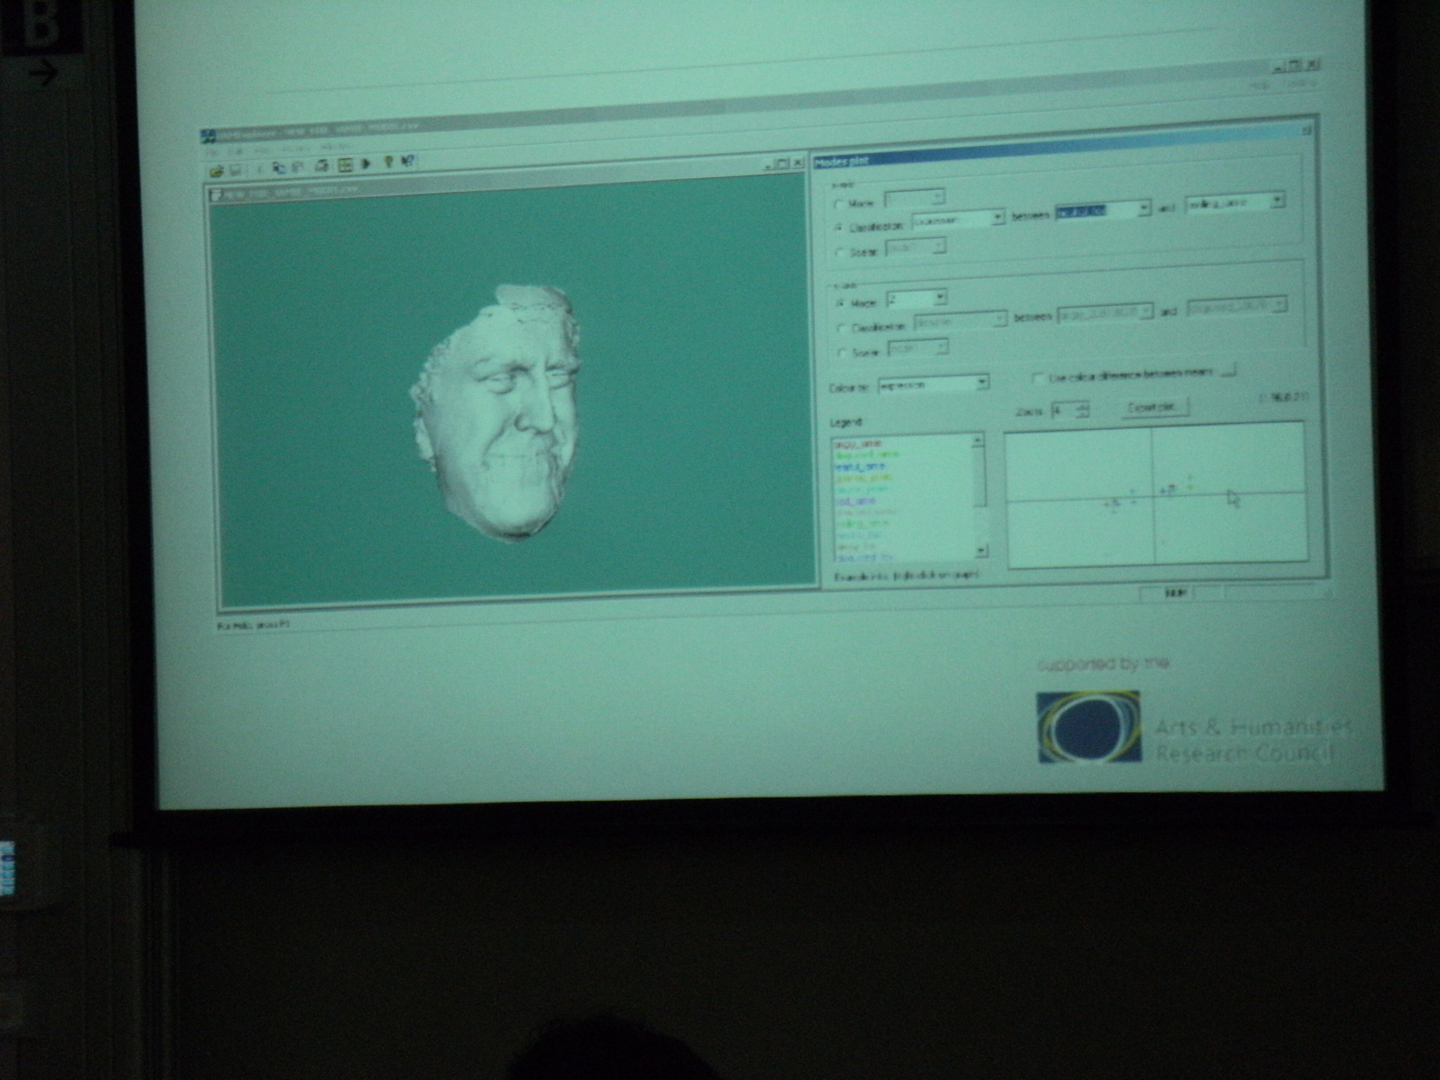 ©ISEA2008: 14th International Symposium on Electronic Art, Barbara Rauch, Virtual Emotions and facial expressions